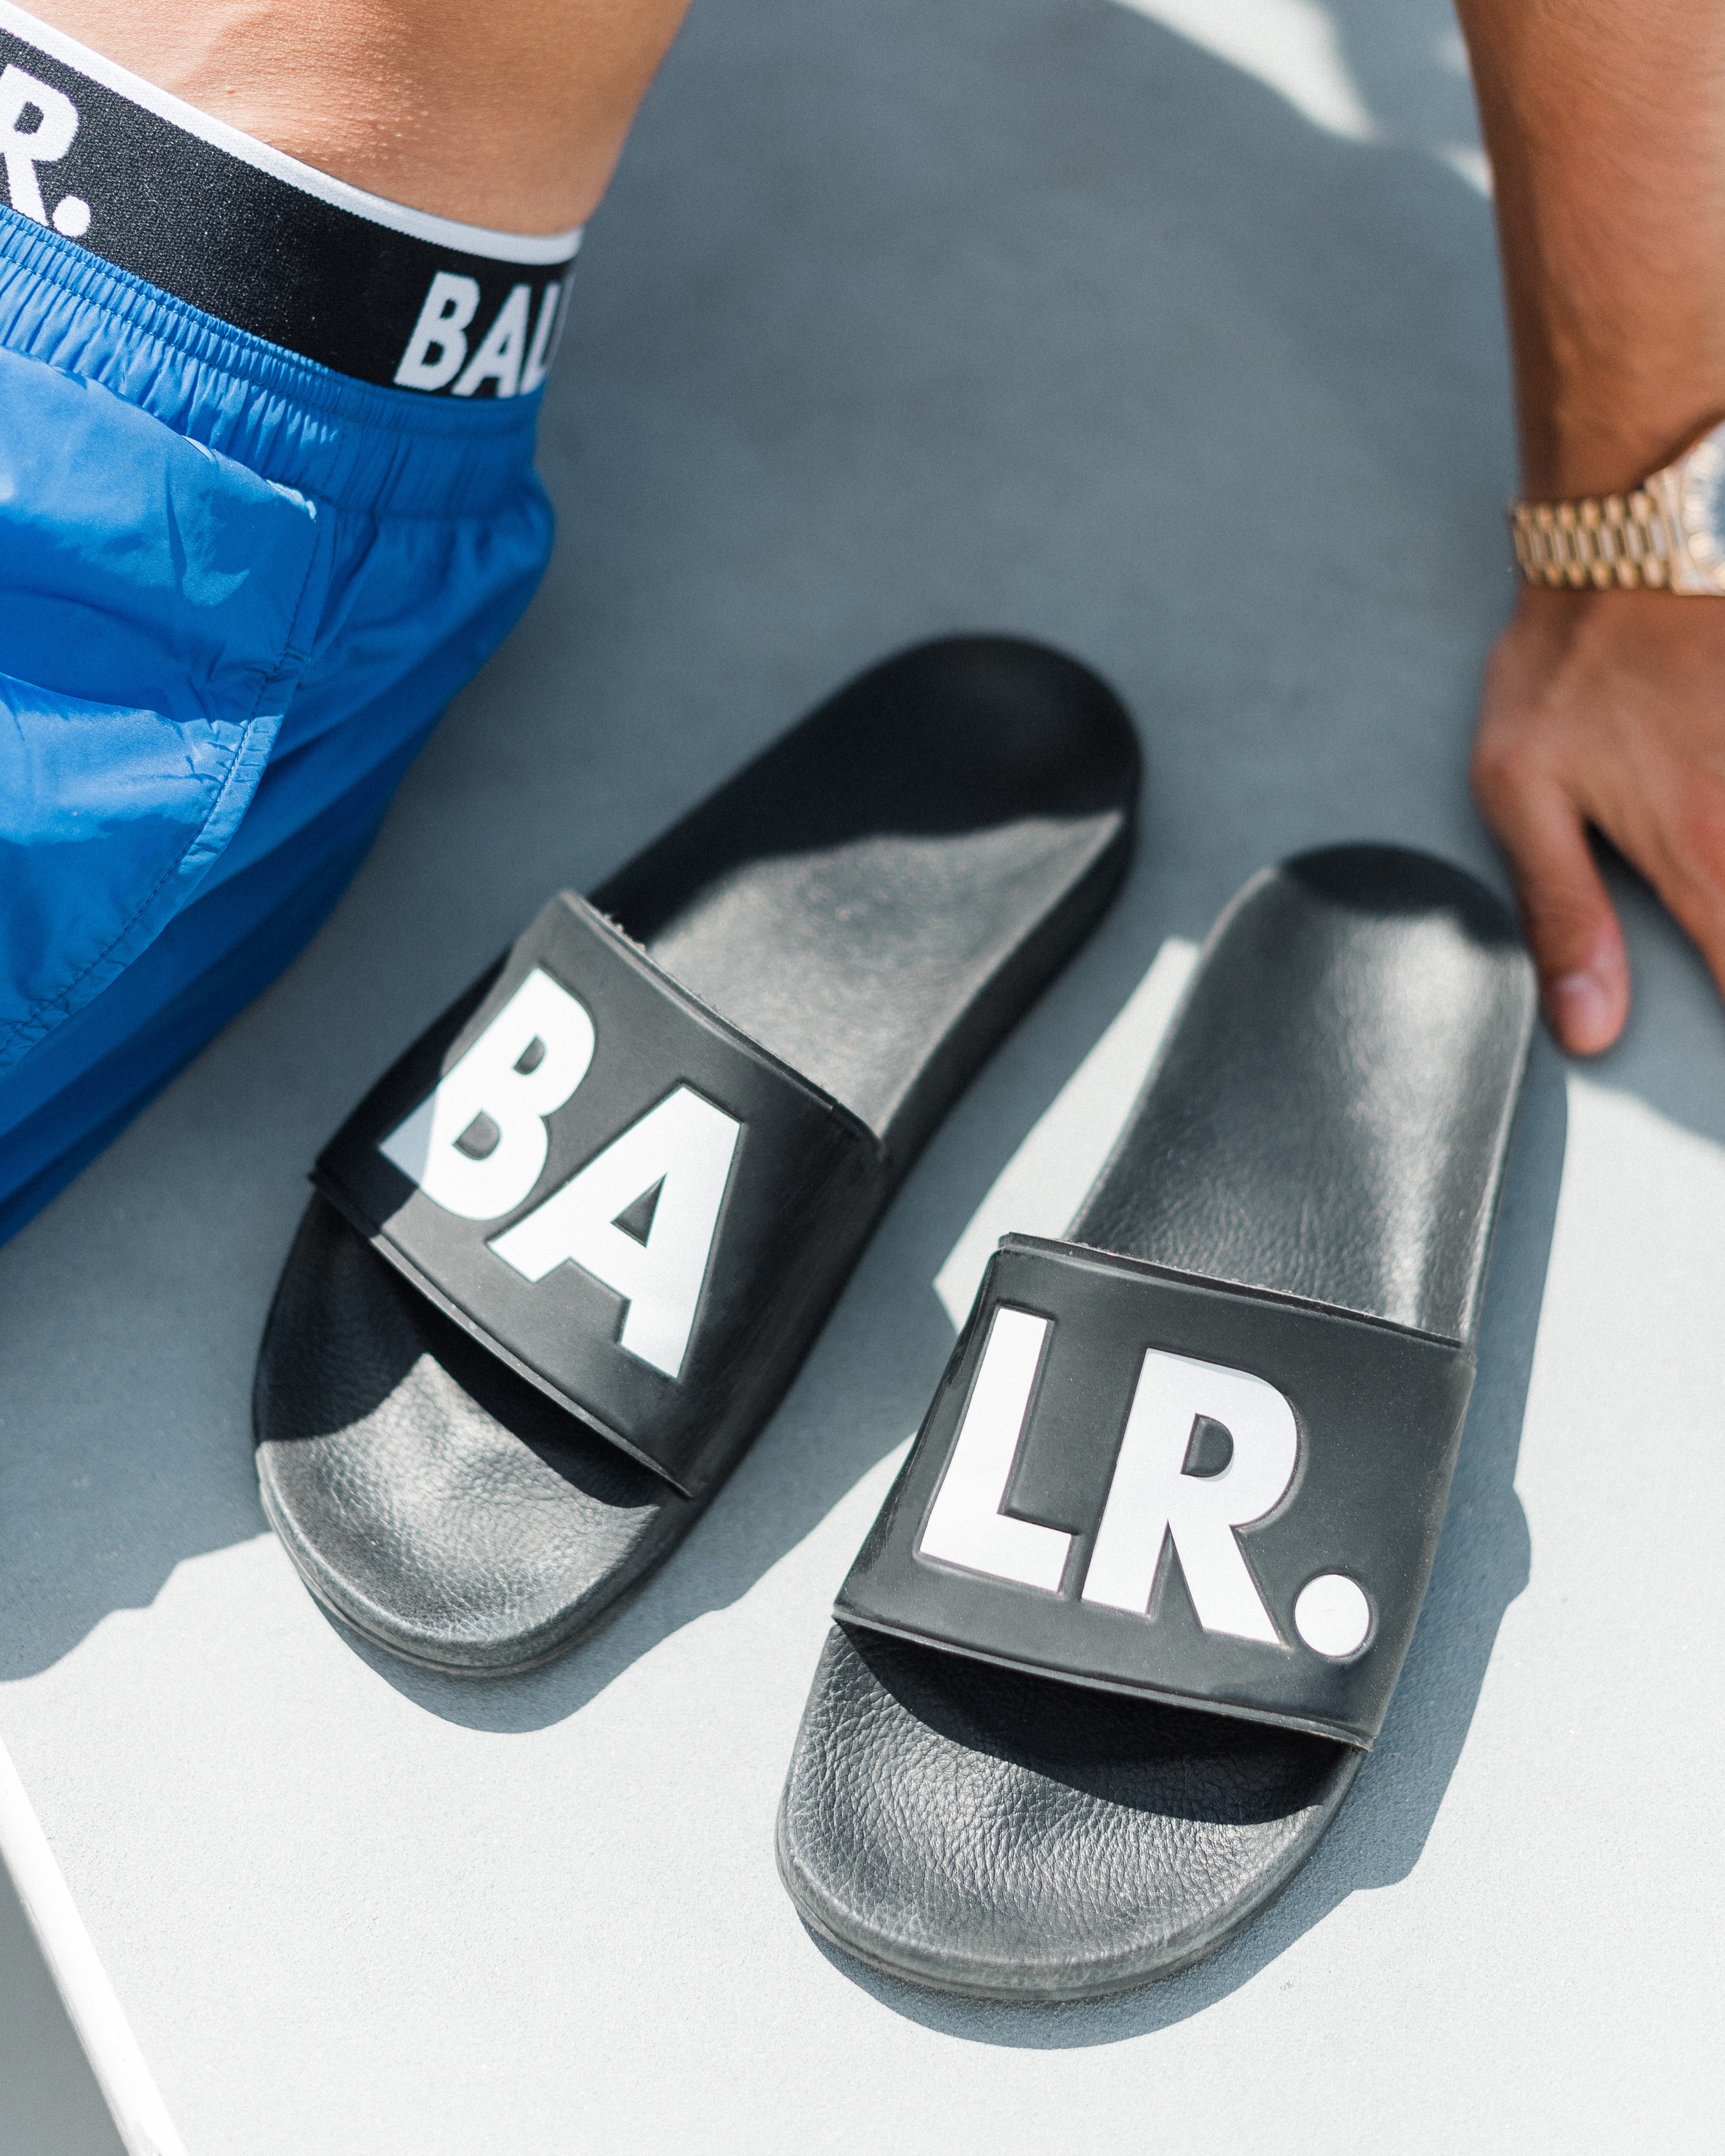 BALR. on Twitter: "Essentials at the pool are relaxing in BALR. style. #BALR #Menswear #LIFEOFABALR. #Lifestyle https://t.co/zTfVURj5Xc" / Twitter